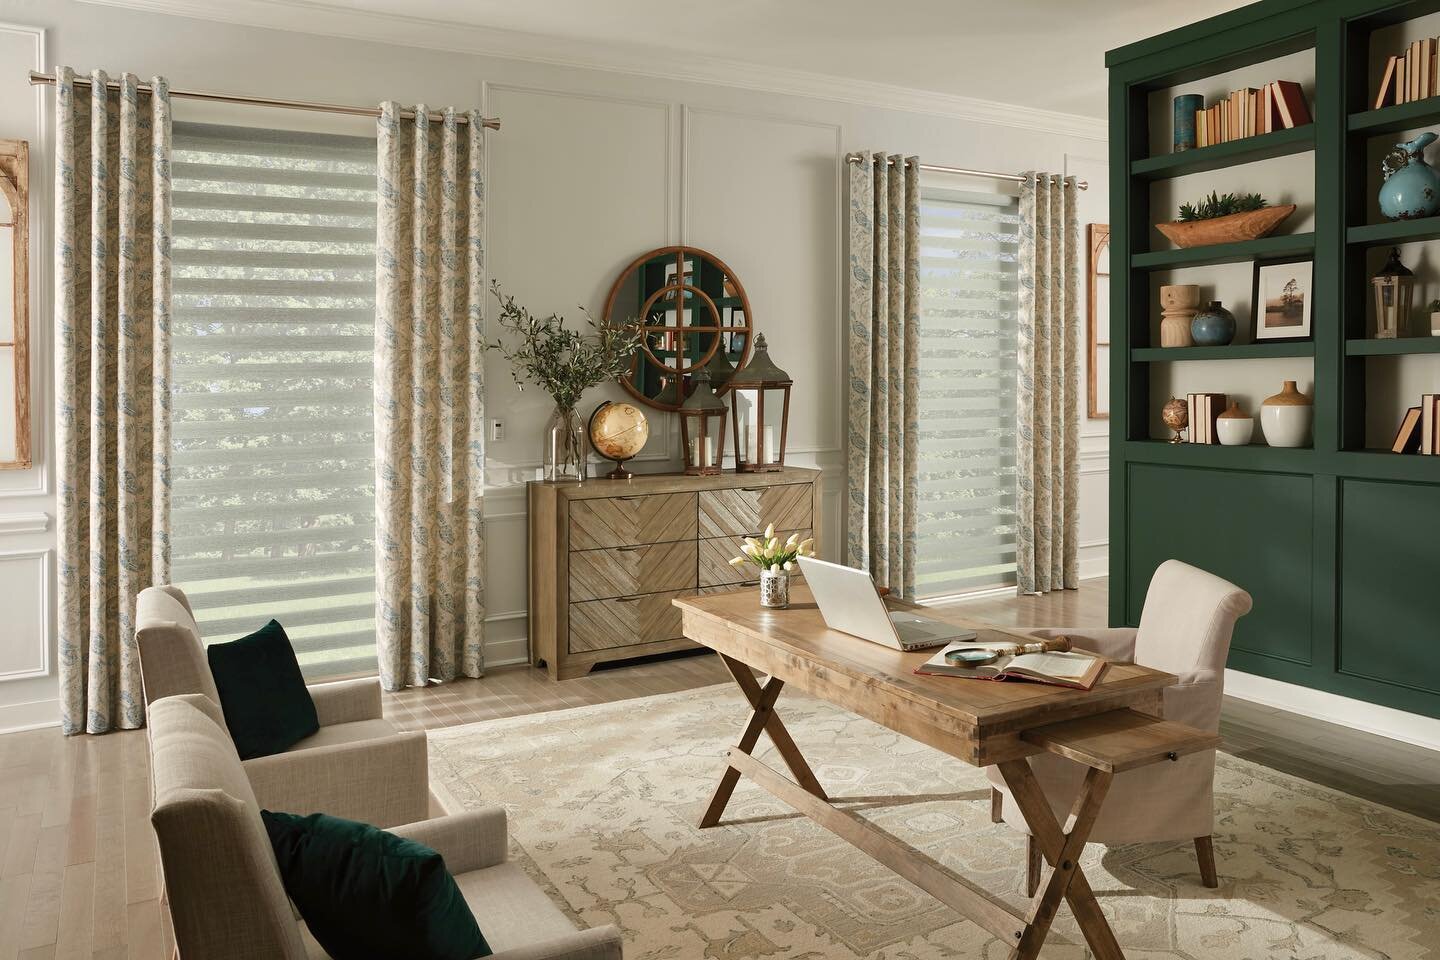 Working from home just got a dreamy upgrade! Picture this: your home office transformed into a dreamy haven with our Bali shades in soothing hues.🏡 🎨 Ready for the grand curtain call? Level up your space with 23% off Bali blinds and shades in our o